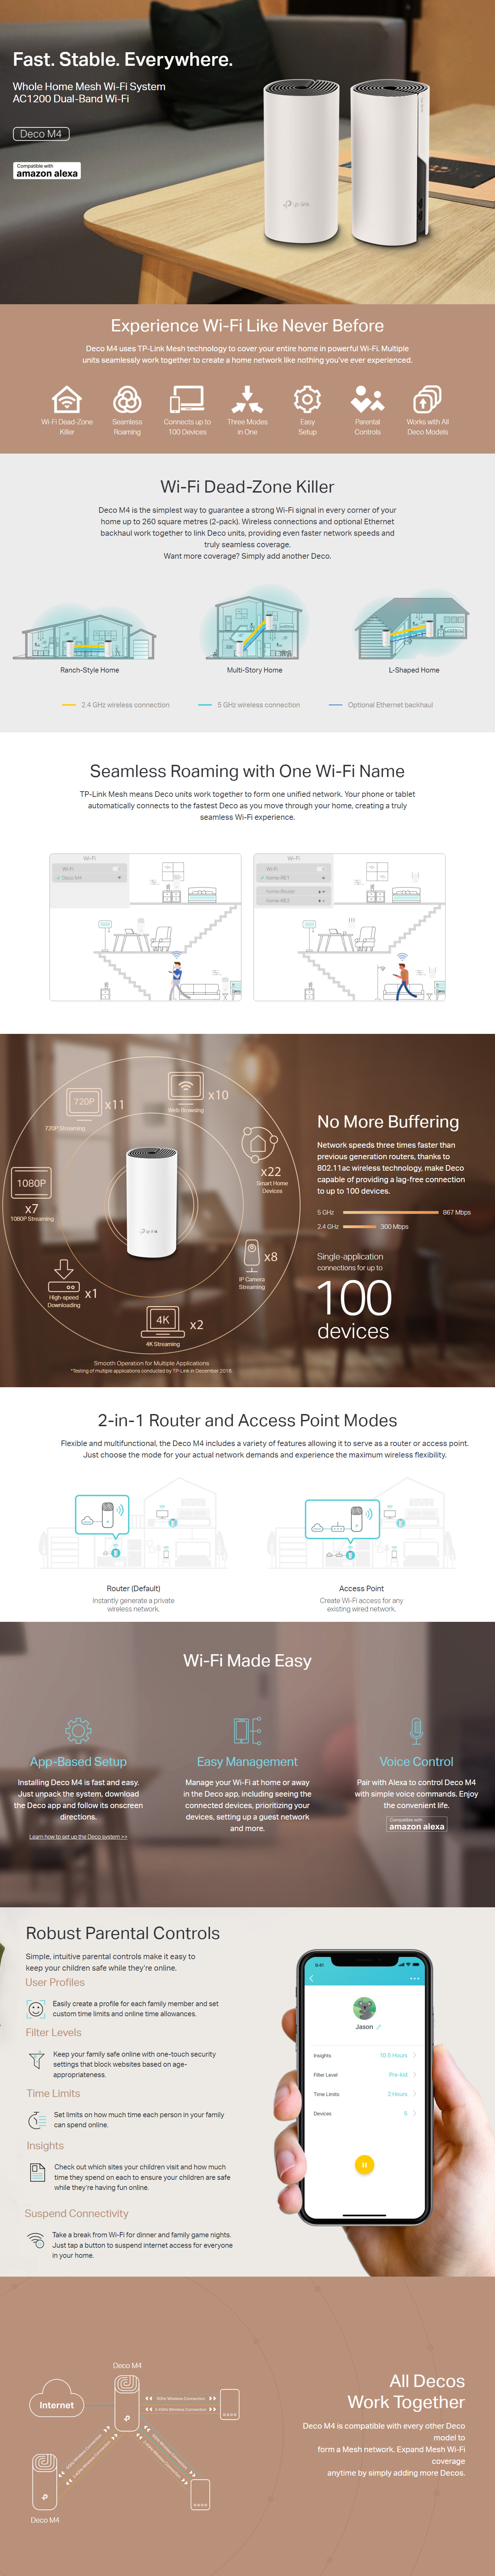 Wireless-Access-Points-WAP-TP-Link-Deco-M4-AC1200-Whole-Home-Mesh-Wi-Fi-System-2-Pack-3